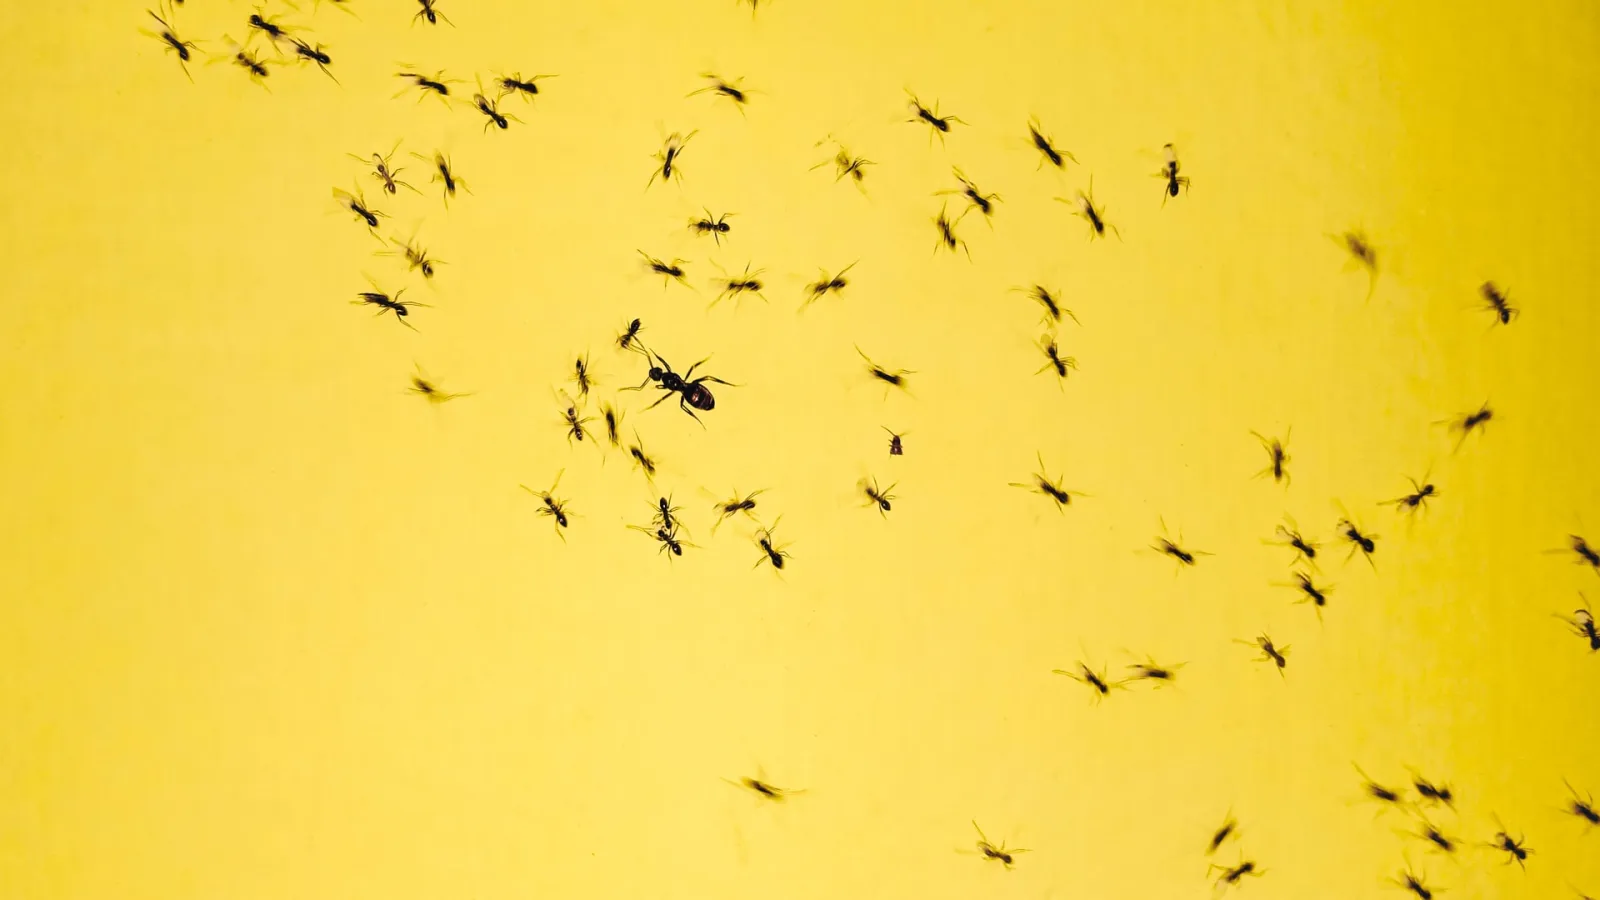 black ants crawling on yellow background